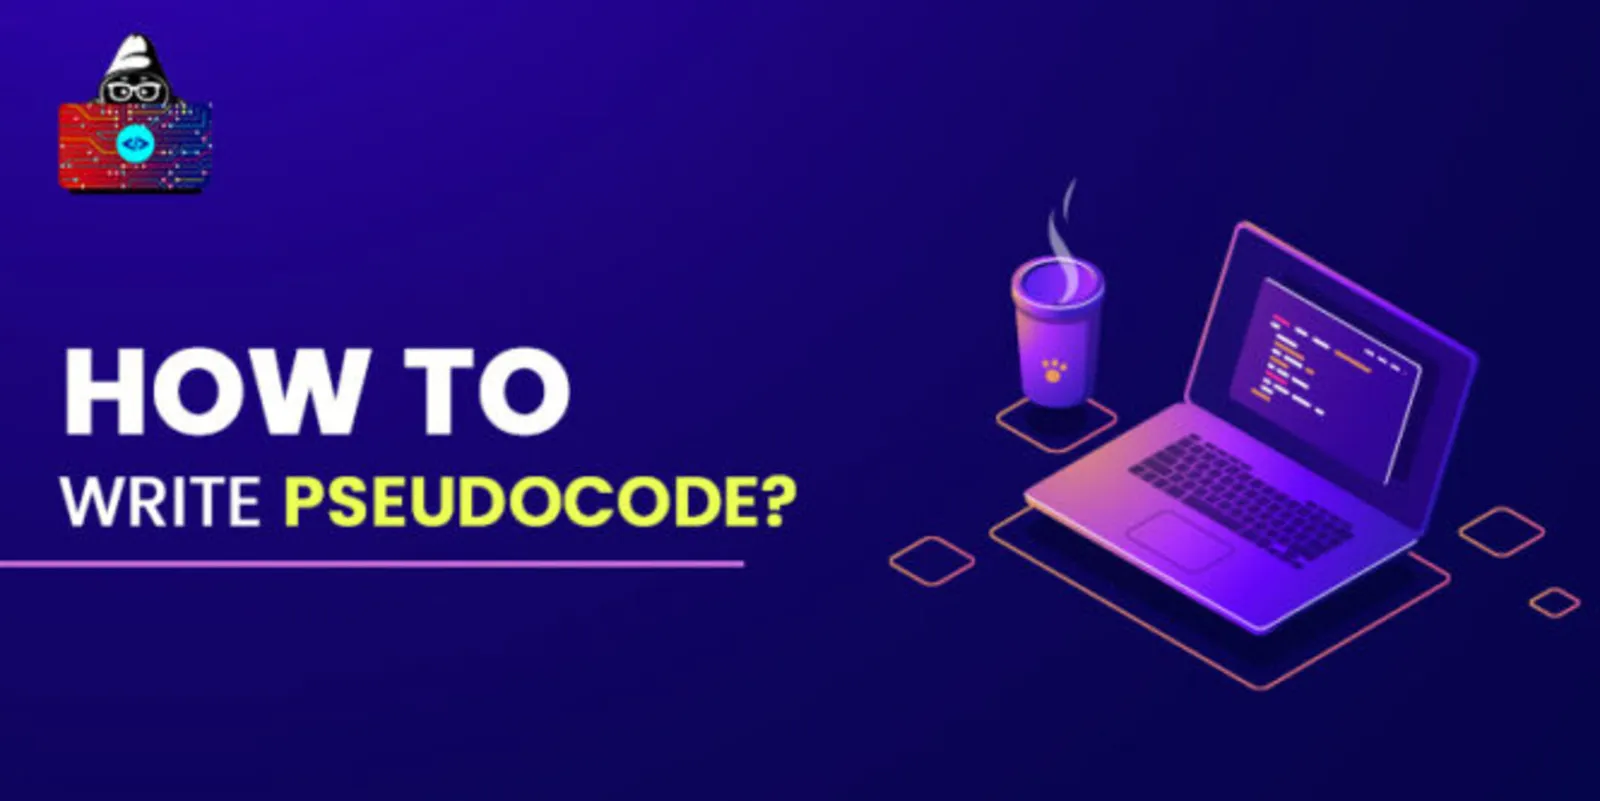 what is pseudocode?